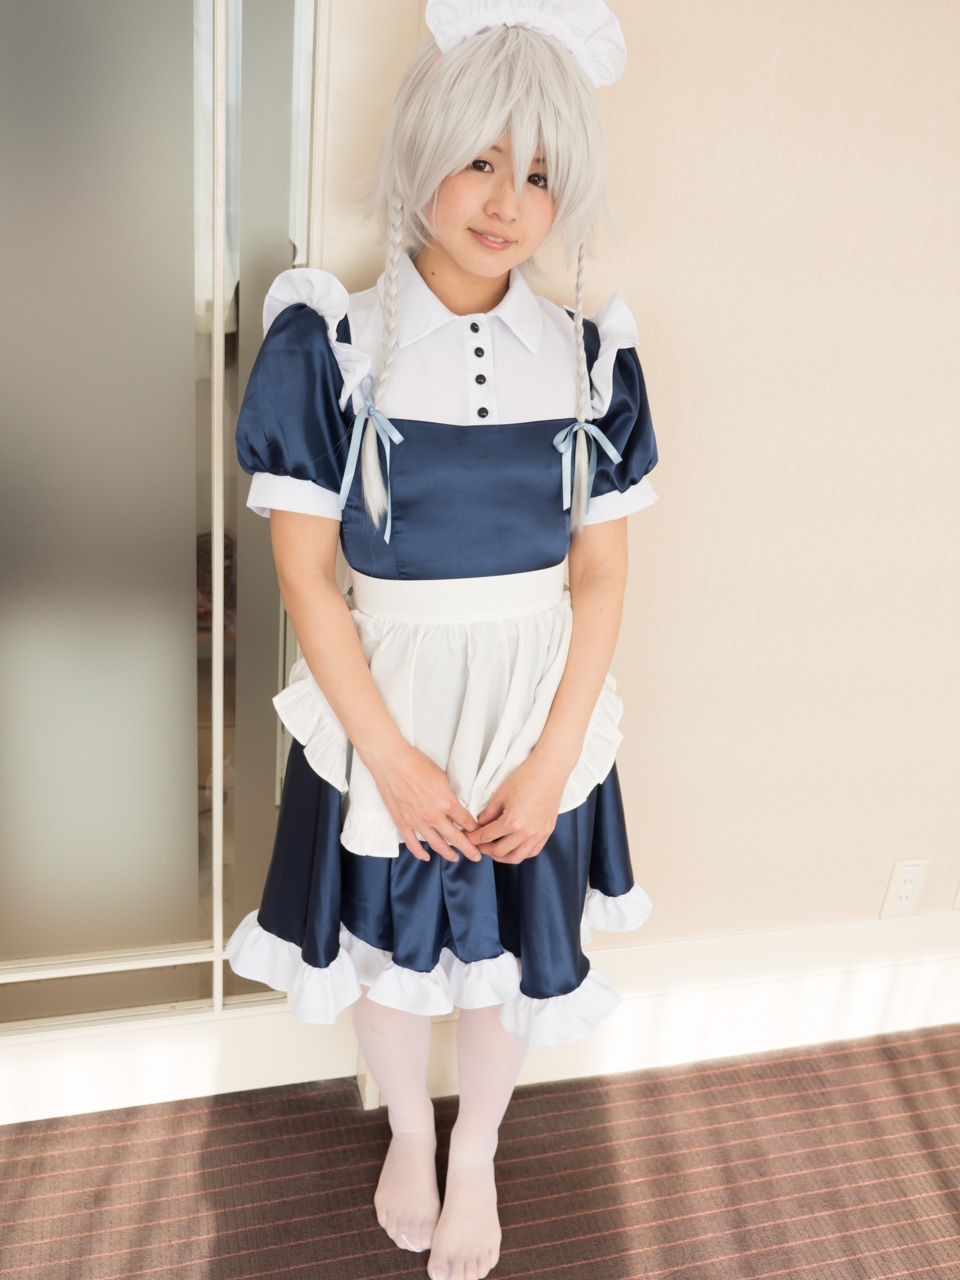 [Sakaki Cosplay Mistress] Sakaki Cosplay Mistress DL 001 (Touhou Project) 169